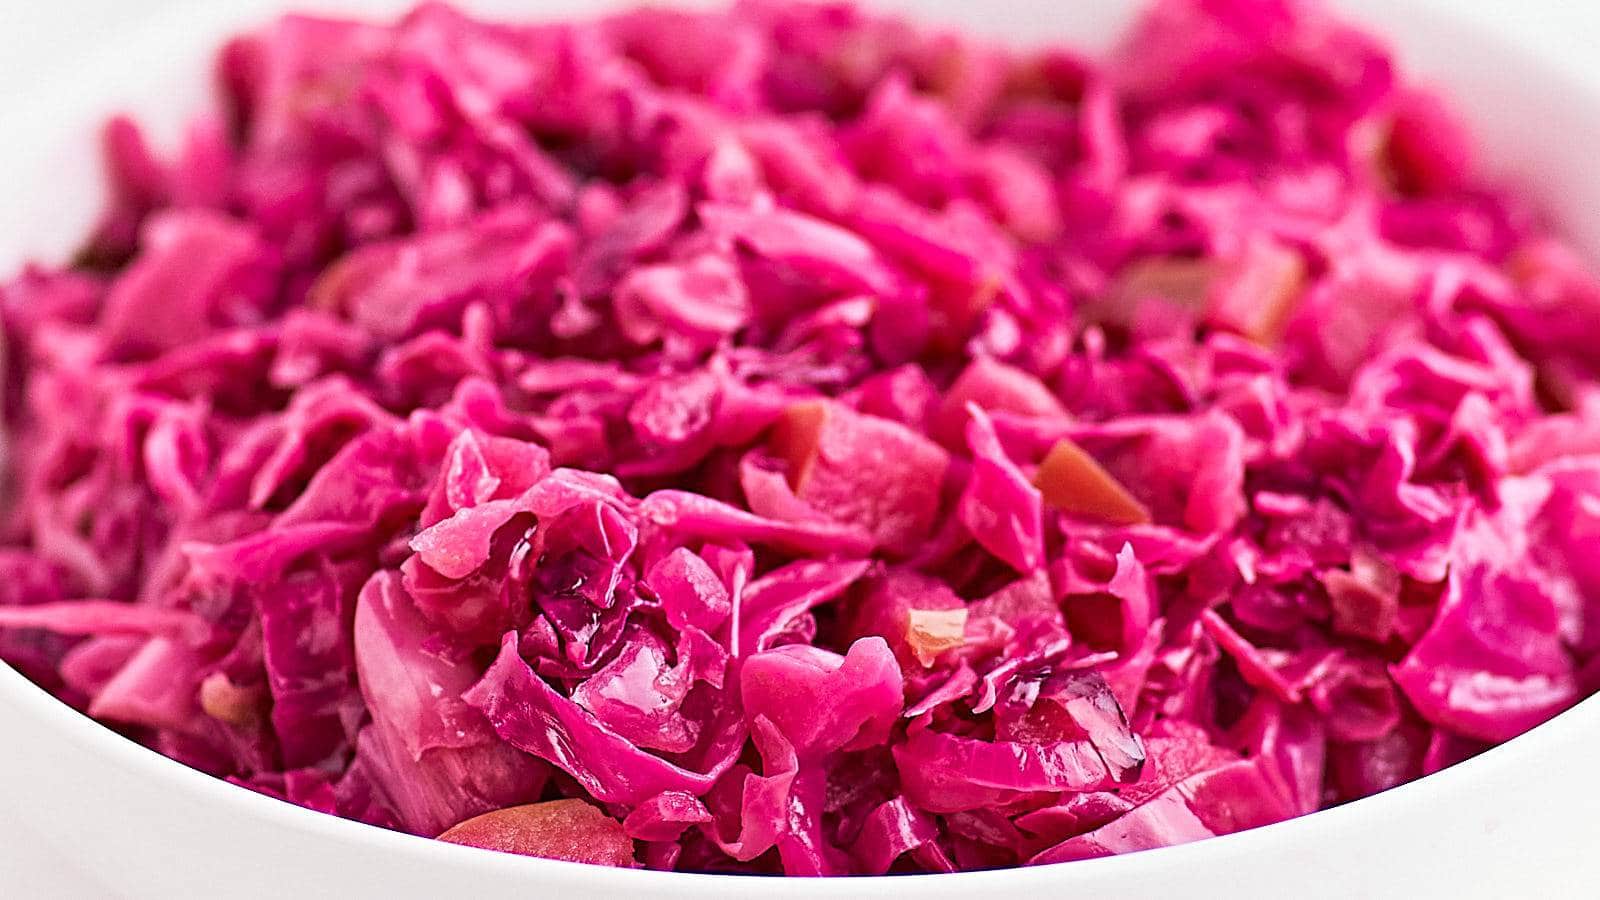 German Red Cabbage (Rotkohl) recipe by Cheerful Cook.